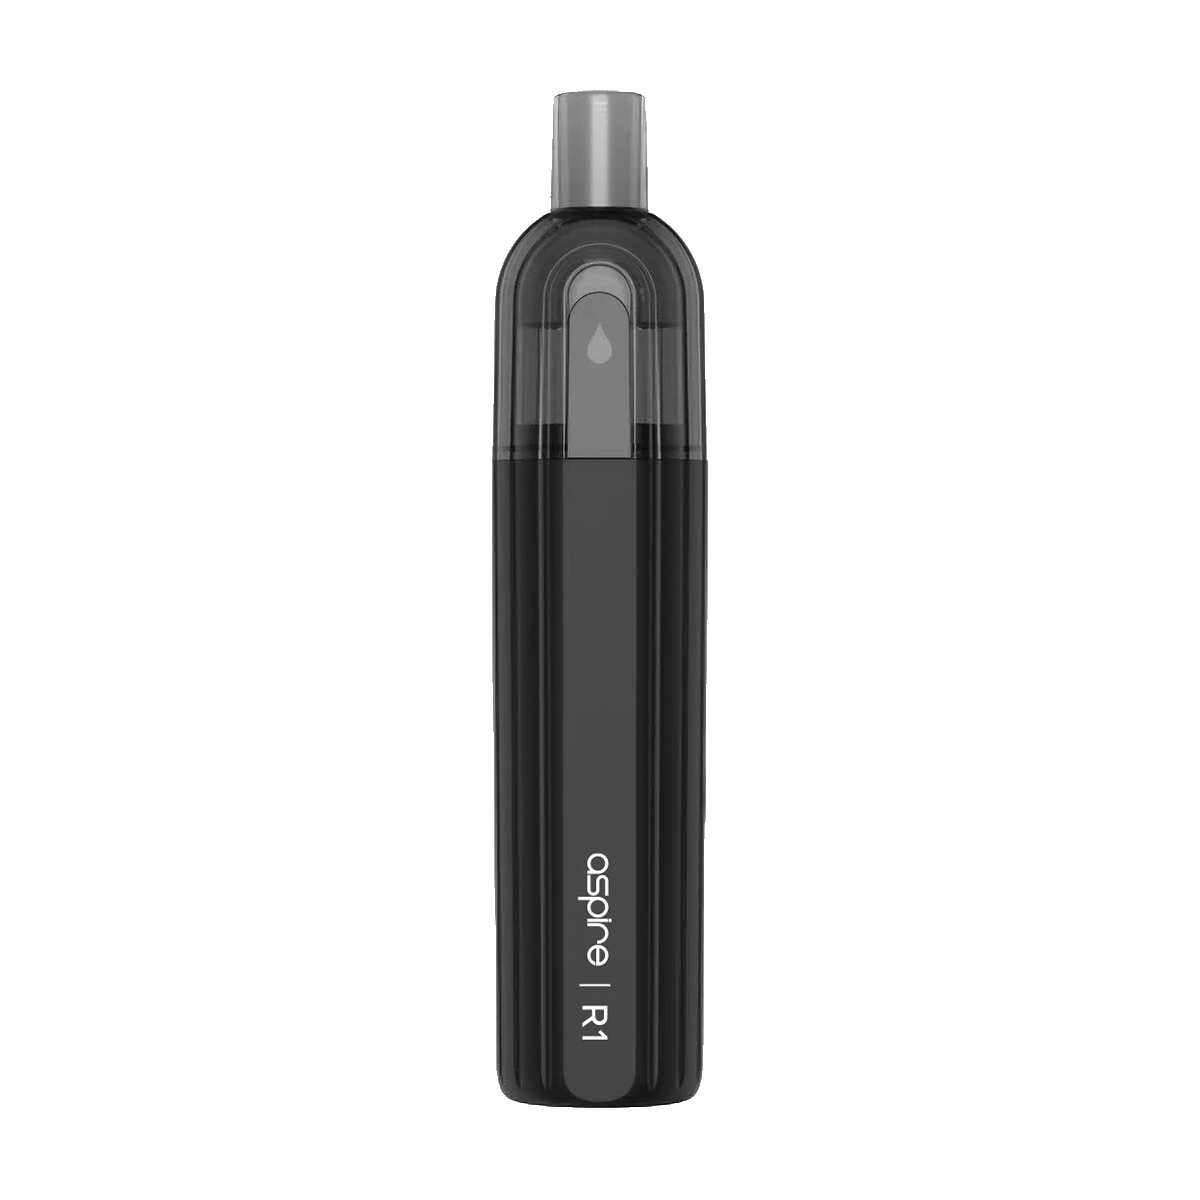 One Up R1 Disposable Device by Aspire - Black